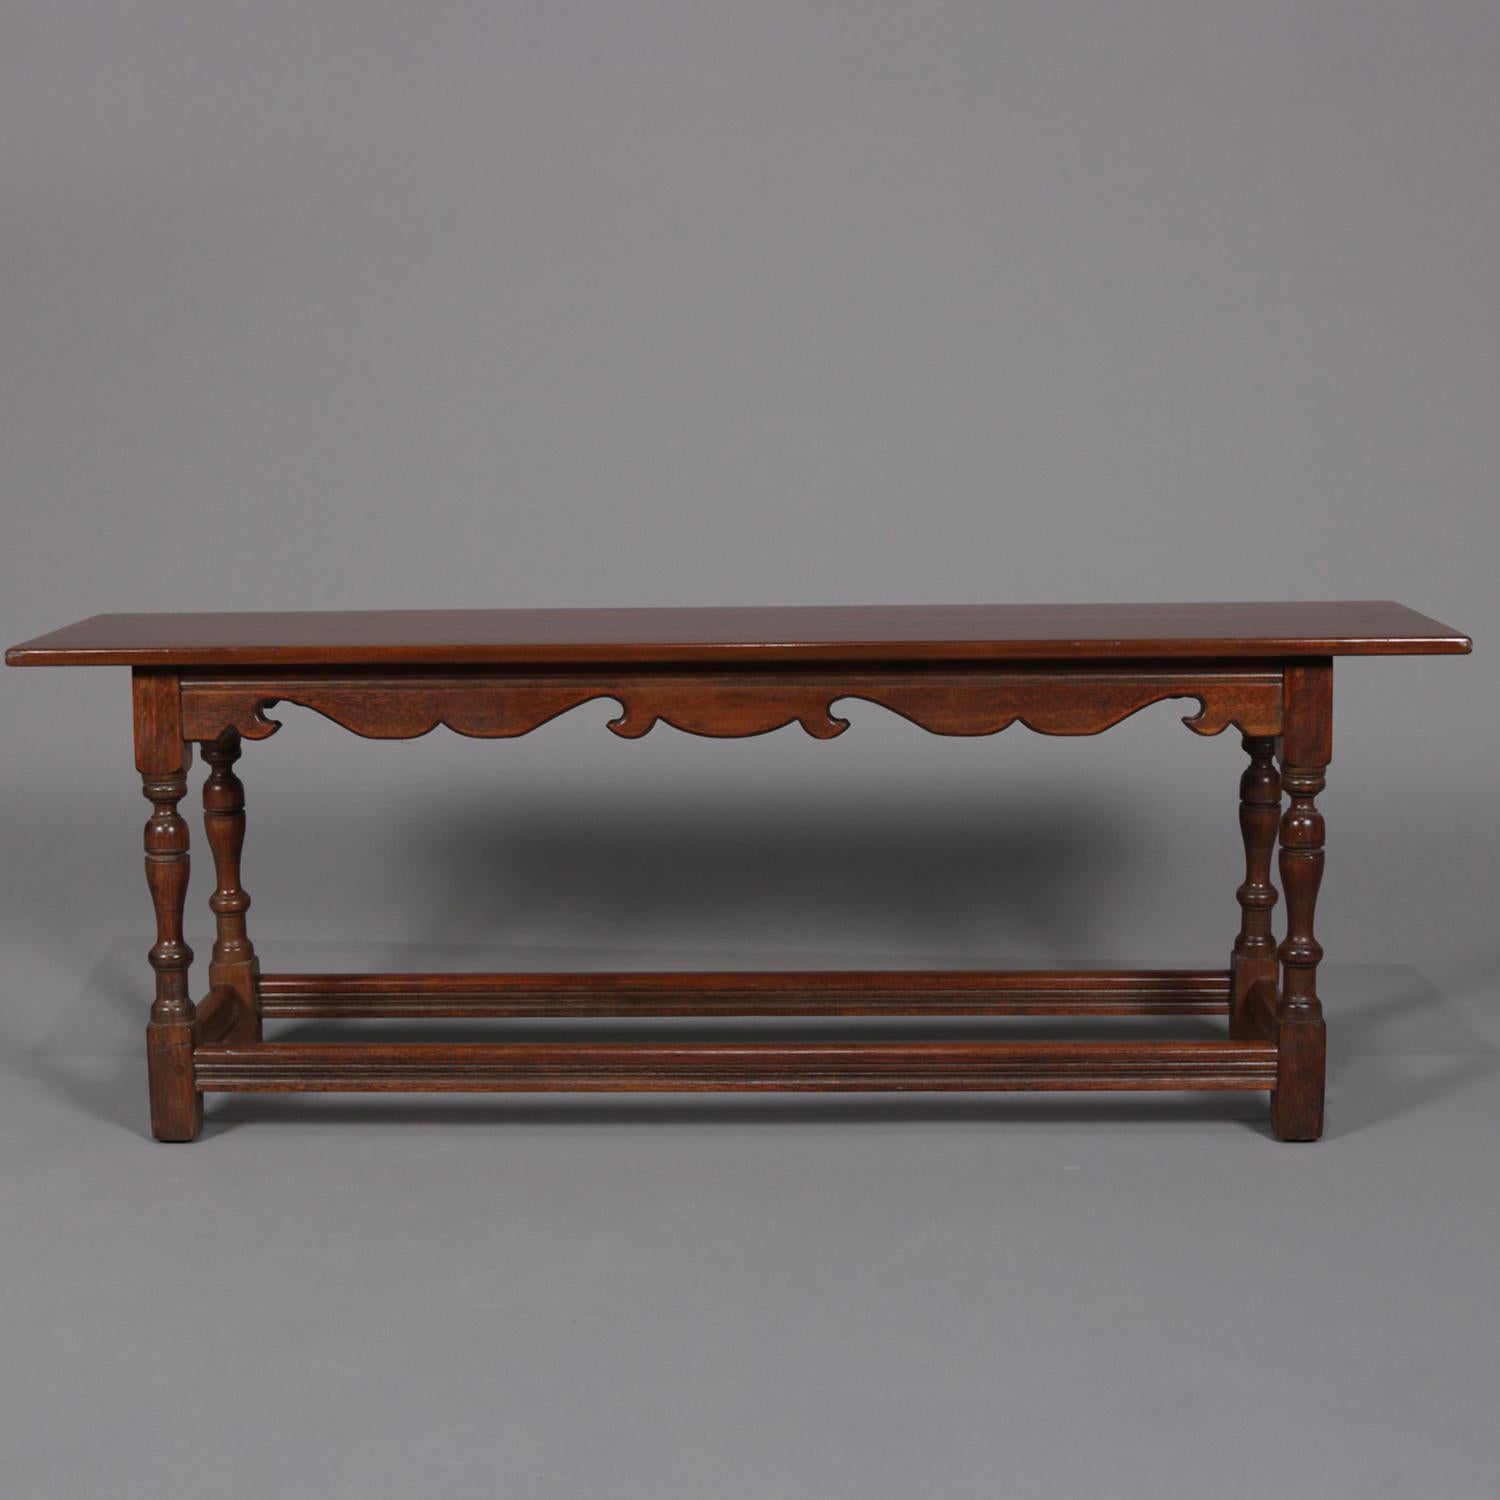 A Colonial Revival Kittinger School long bench features cherry construction with seat surmounting scroll and scalloped apron and raided on turned legs with pegged joints at apron and stretchers, circa 1930

Measures: 18.75